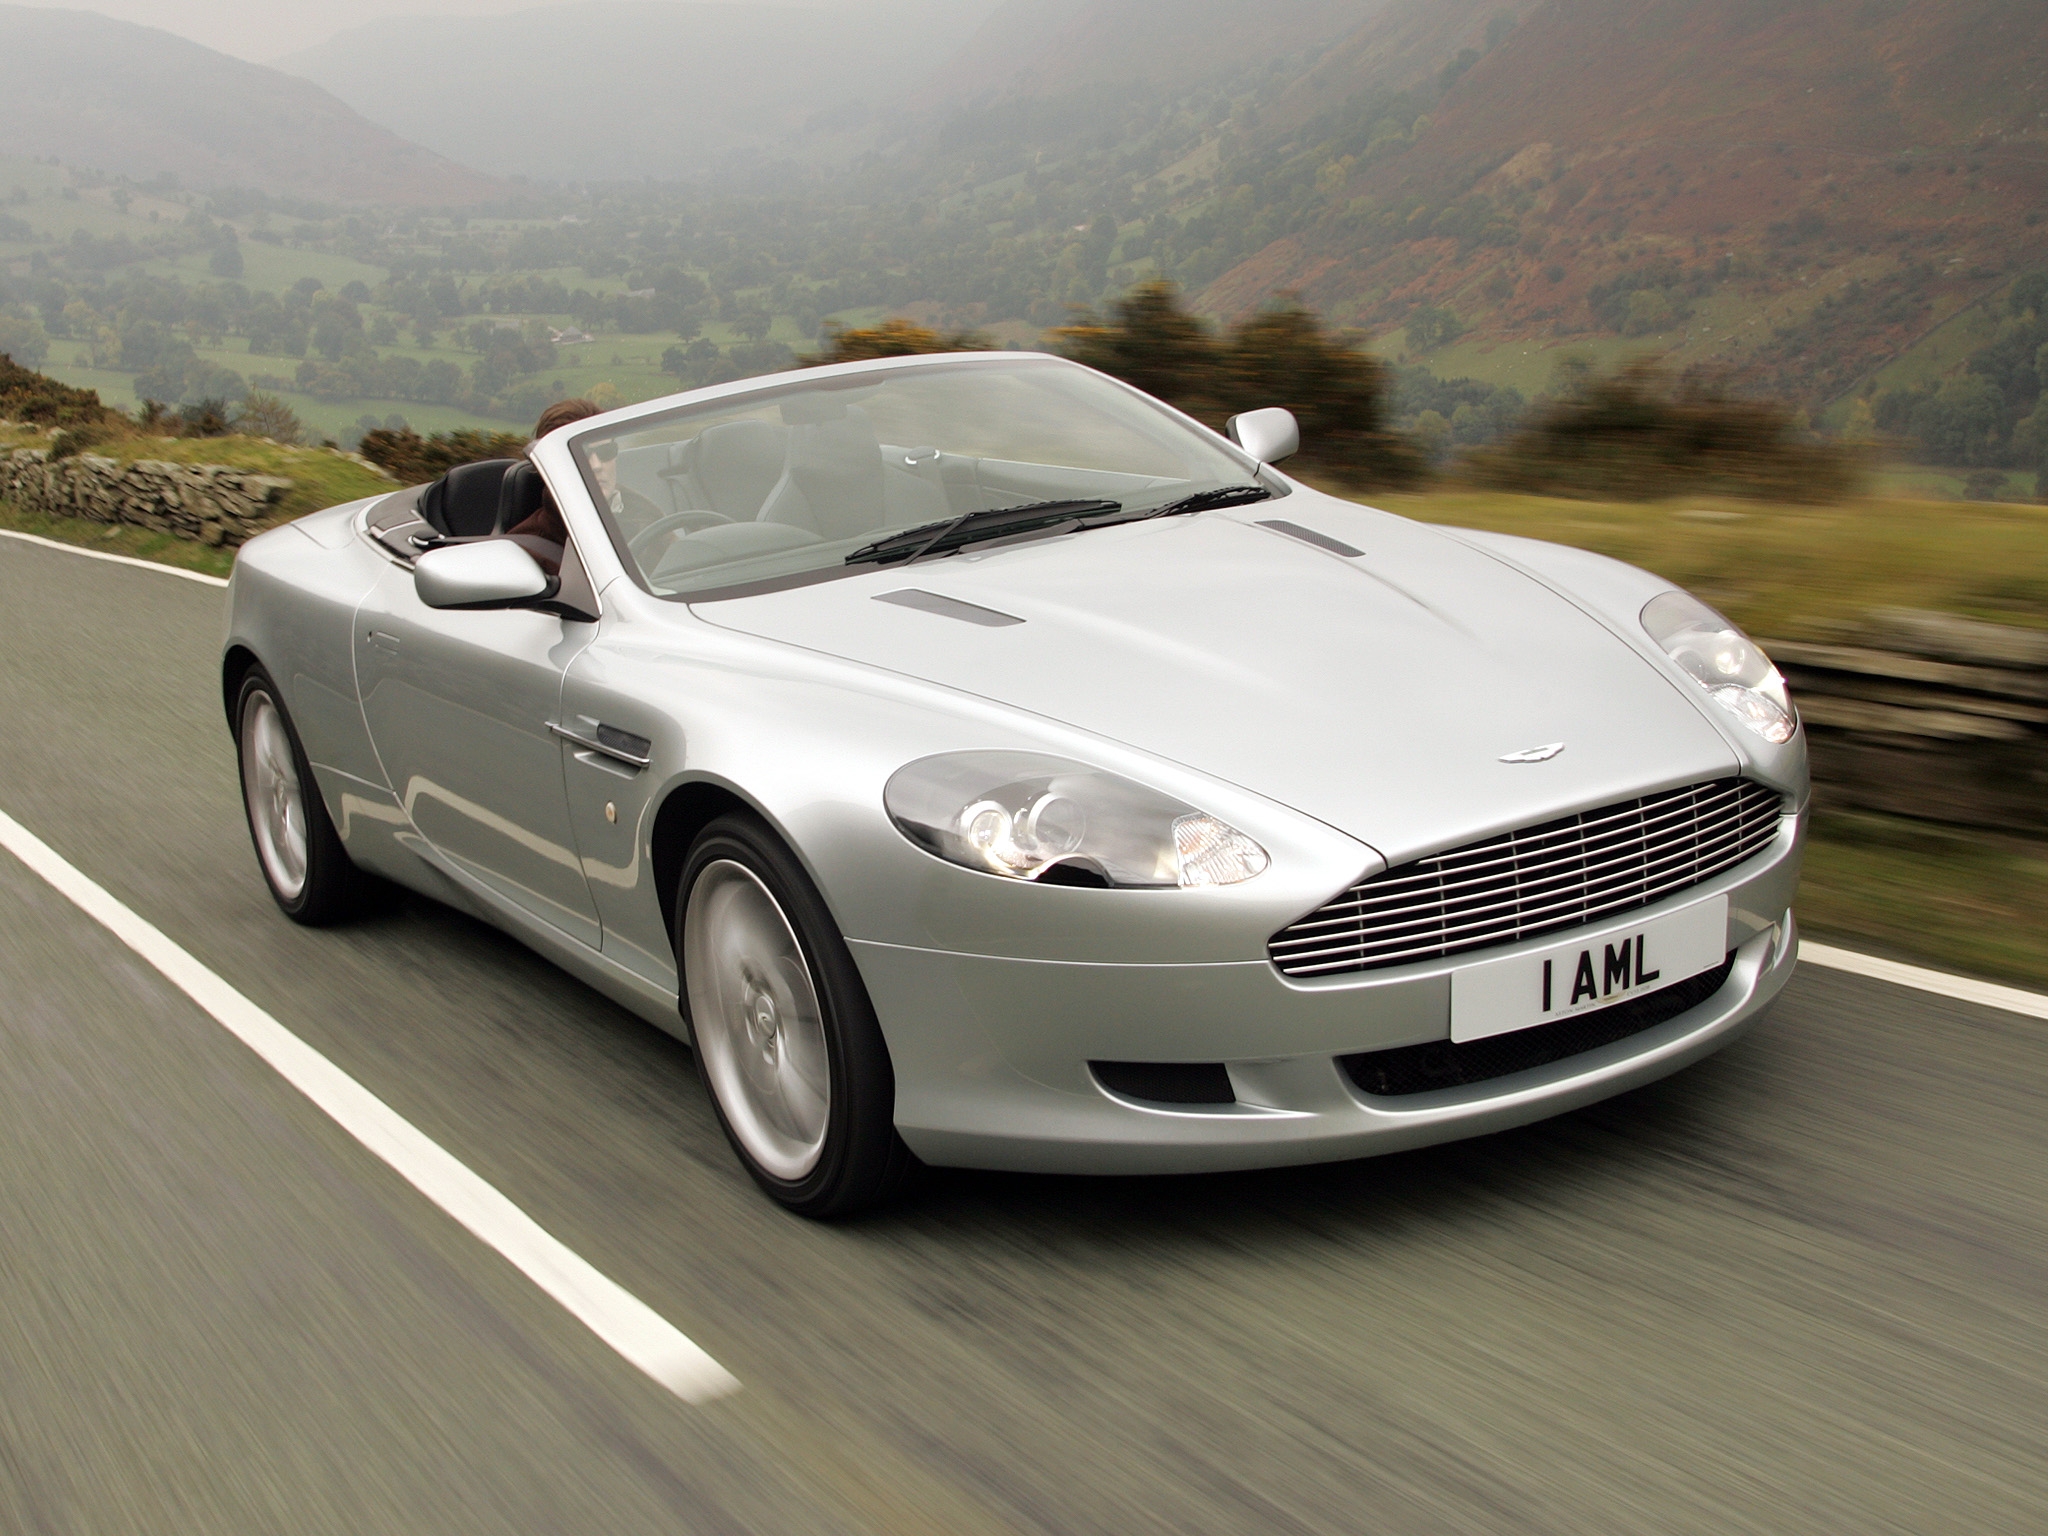 front view, nature, aston martin, cars, speed, style, 2004, silver metallic, db9